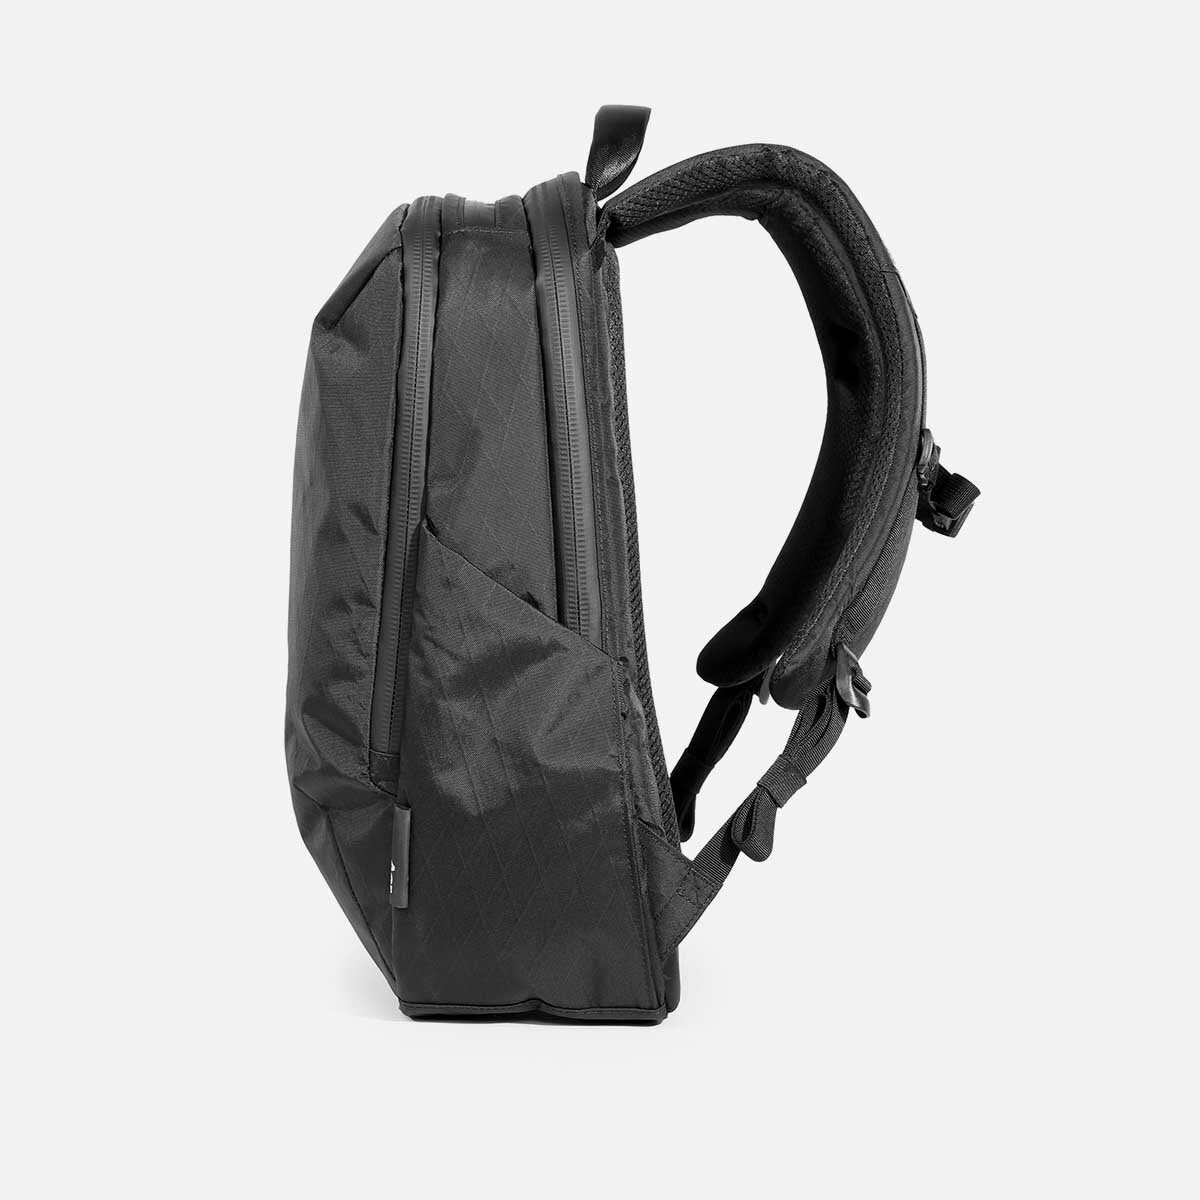 Aer Day Pack 2 (X-Pac) the best work backpacks – Mined